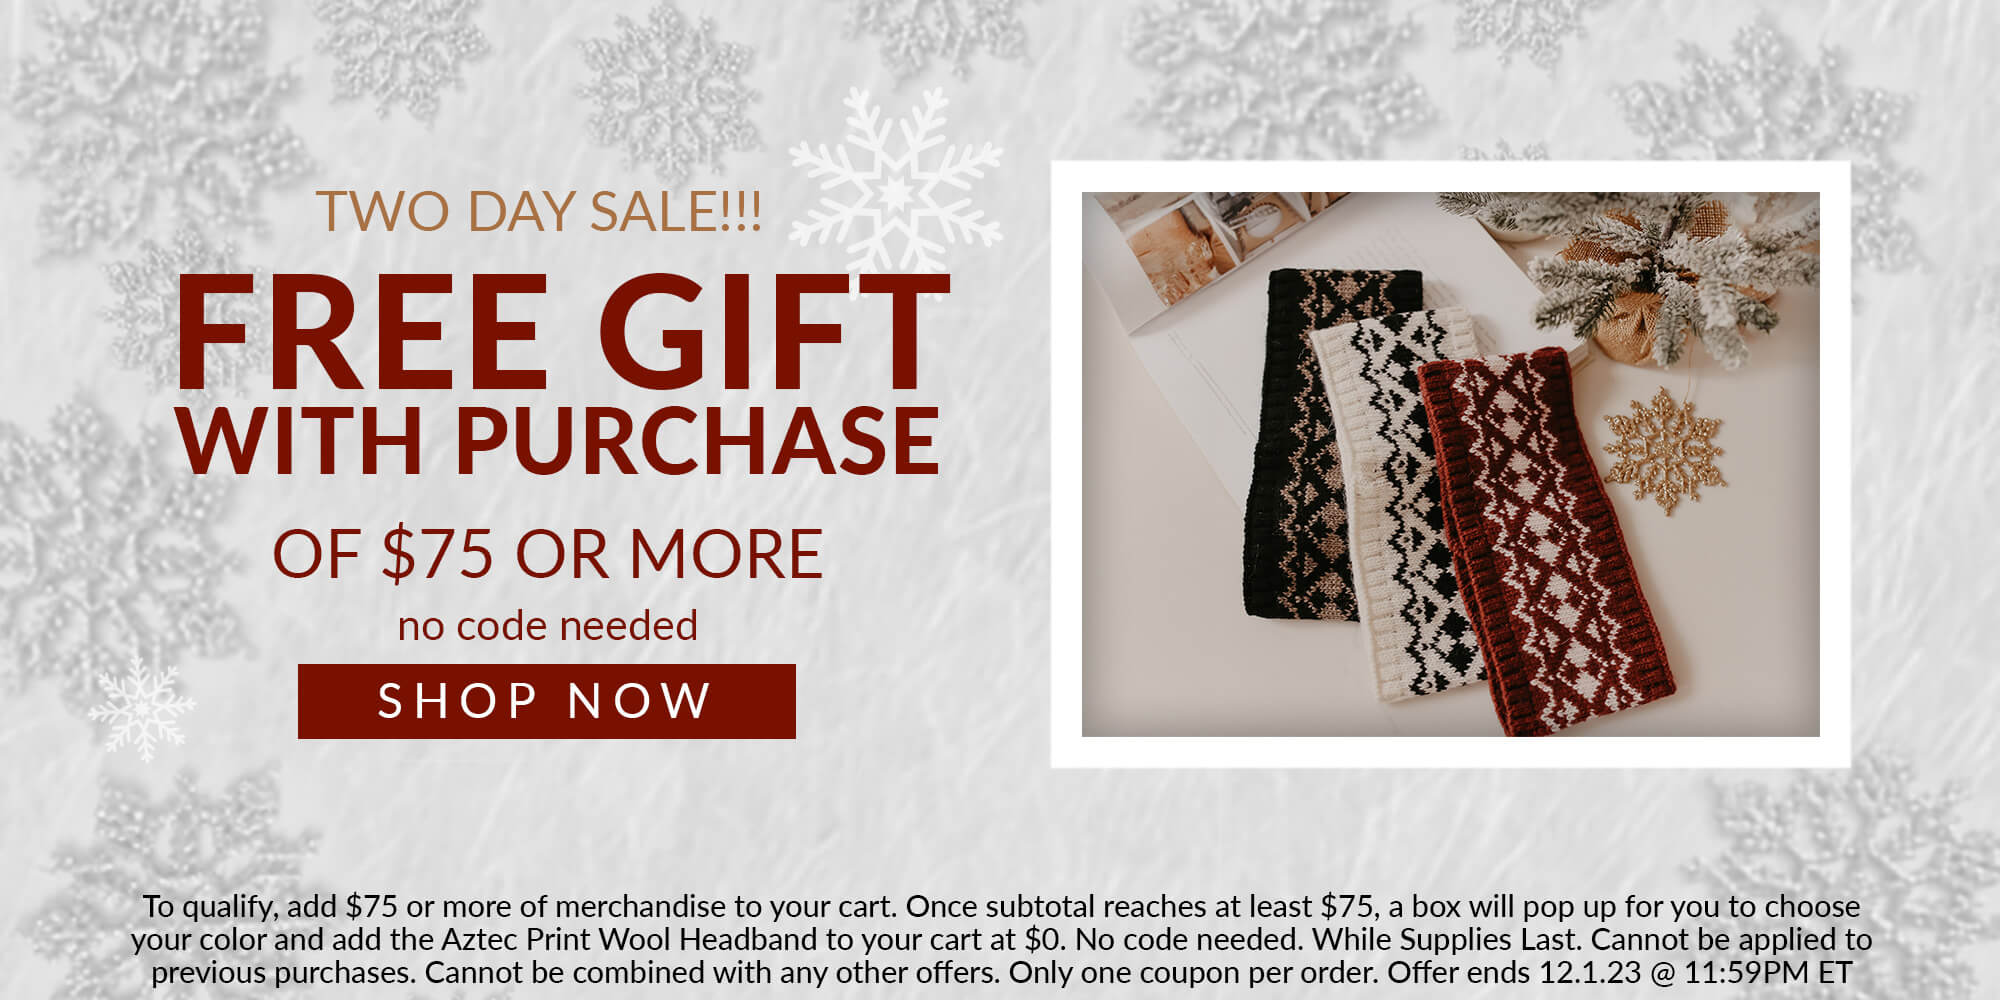 two day sale!!! free gift with purchase of $75 or more no code needed shop now To qualify, add $75 or more of merchandise to your cart. Once subtotal reaches at least $75, a box will pop up for you to choose your color and add the Aztec Print Wool Headband to your cart at $0. No code needed. While Supplies Last. Cannot be applied to previous purchases. Cannot be combined with any other offers. Only one coupon per order. Offer ends 12.1.23 @ 11:59PM ET